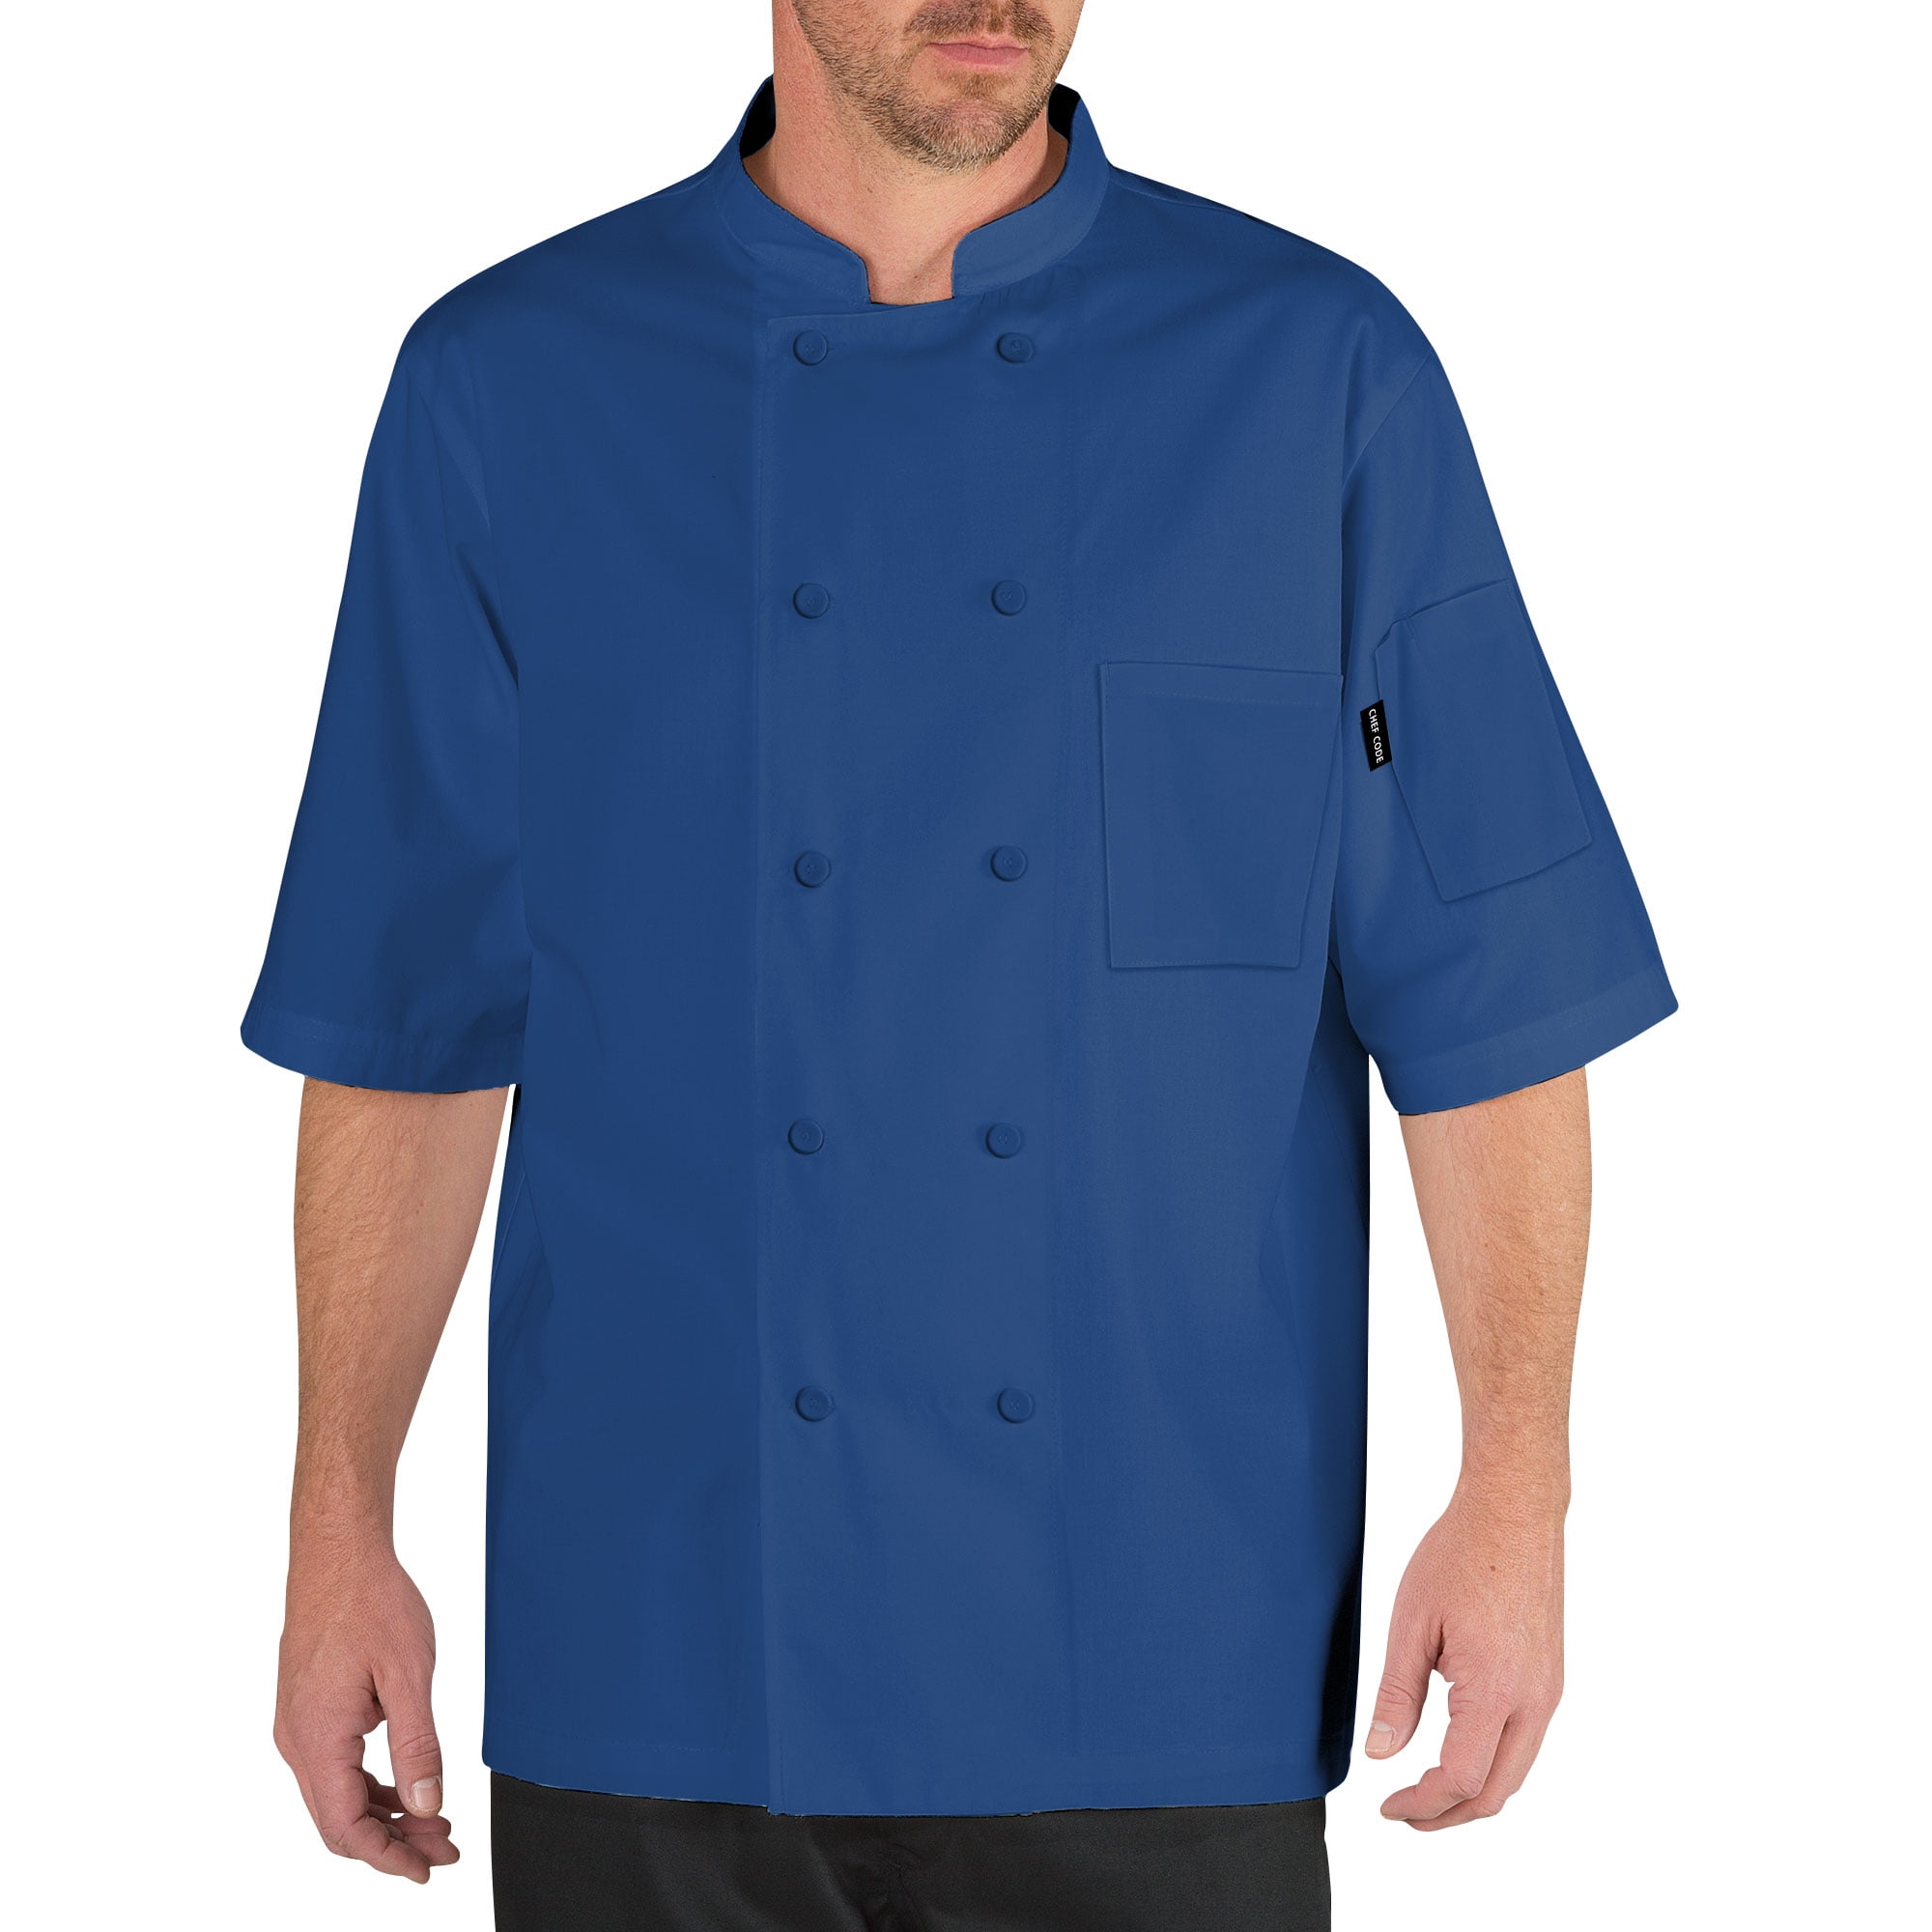 CHEFS JACKET CLOTHING/APRONS UNISEX NEW INS07 PRESS STUD BUTTONS,HALF SLEEVE 